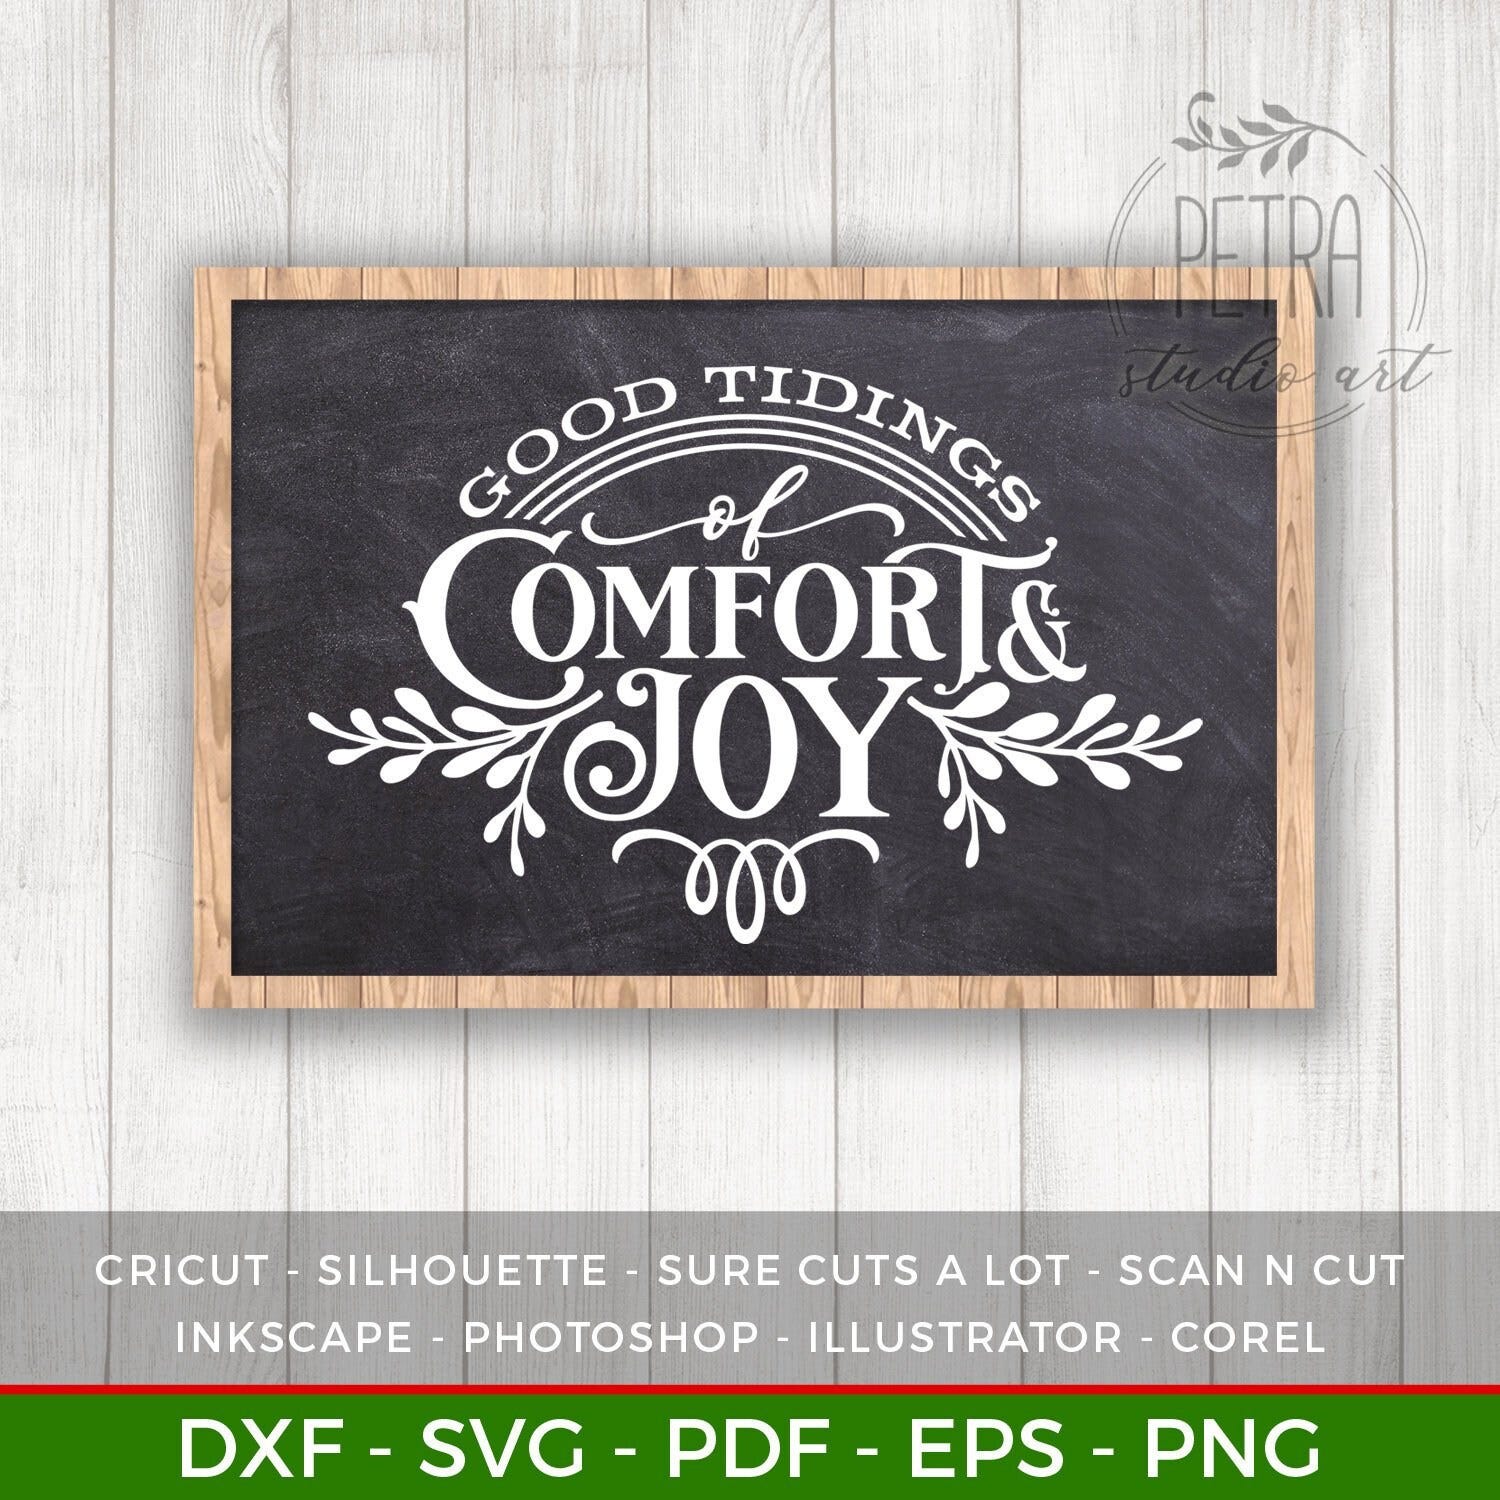 Good Tidings of Comfort and Joy Svg Cut File for Rustic Christmas Home Decor and Farmhouse Wall Decoration. Personal and small business use.